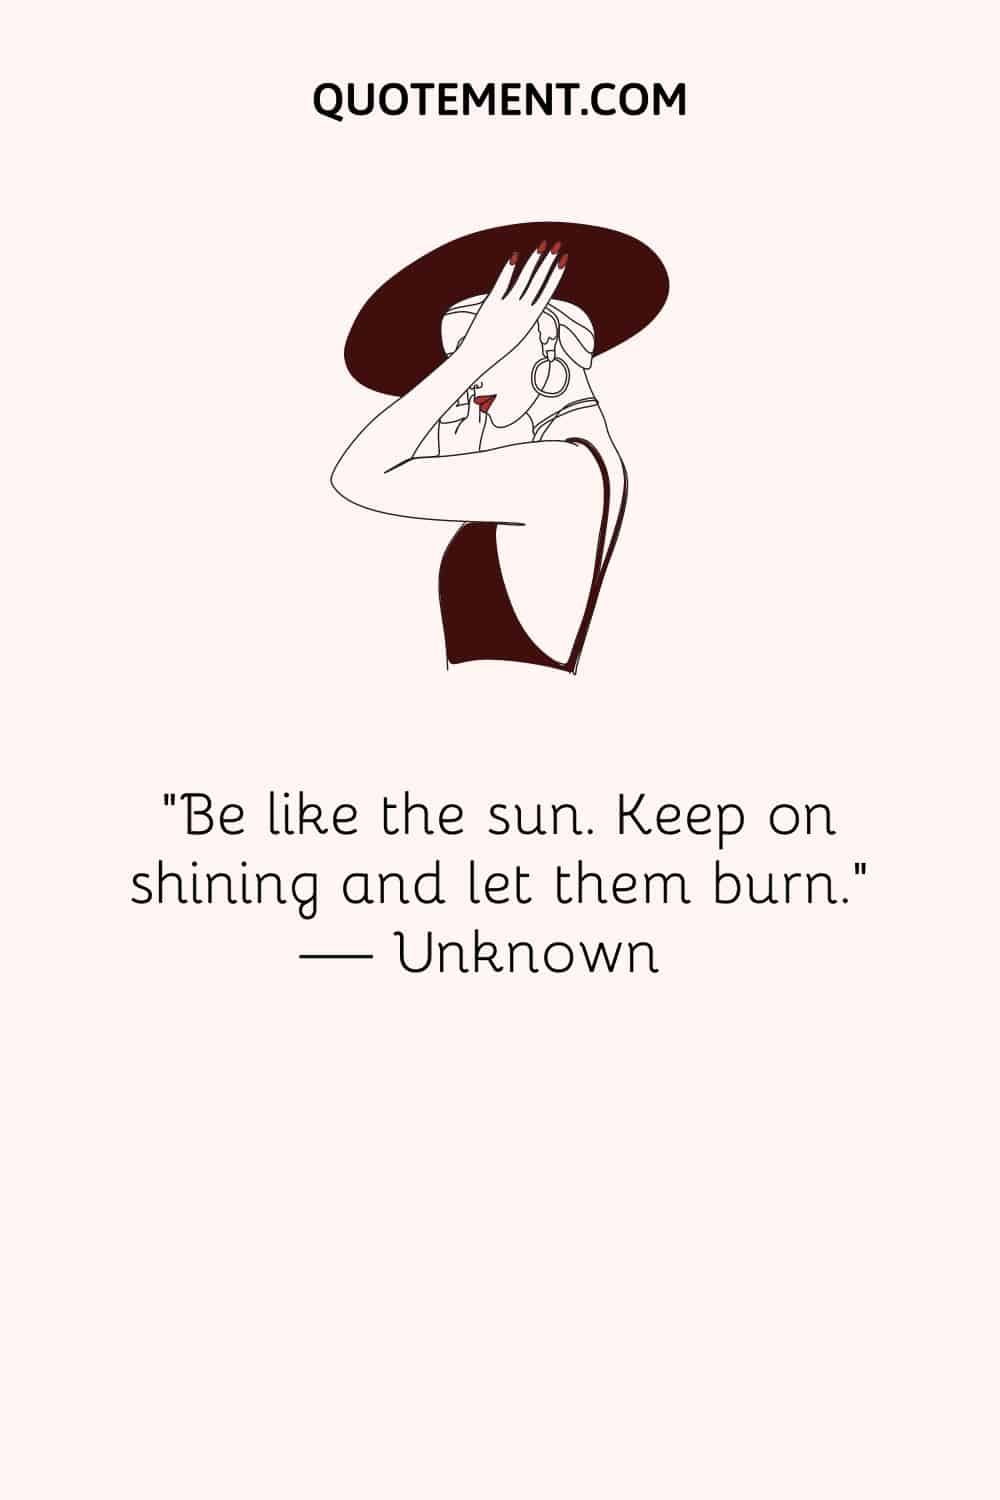 “Be like the sun. Keep on shining and let them burn.” — Unknown